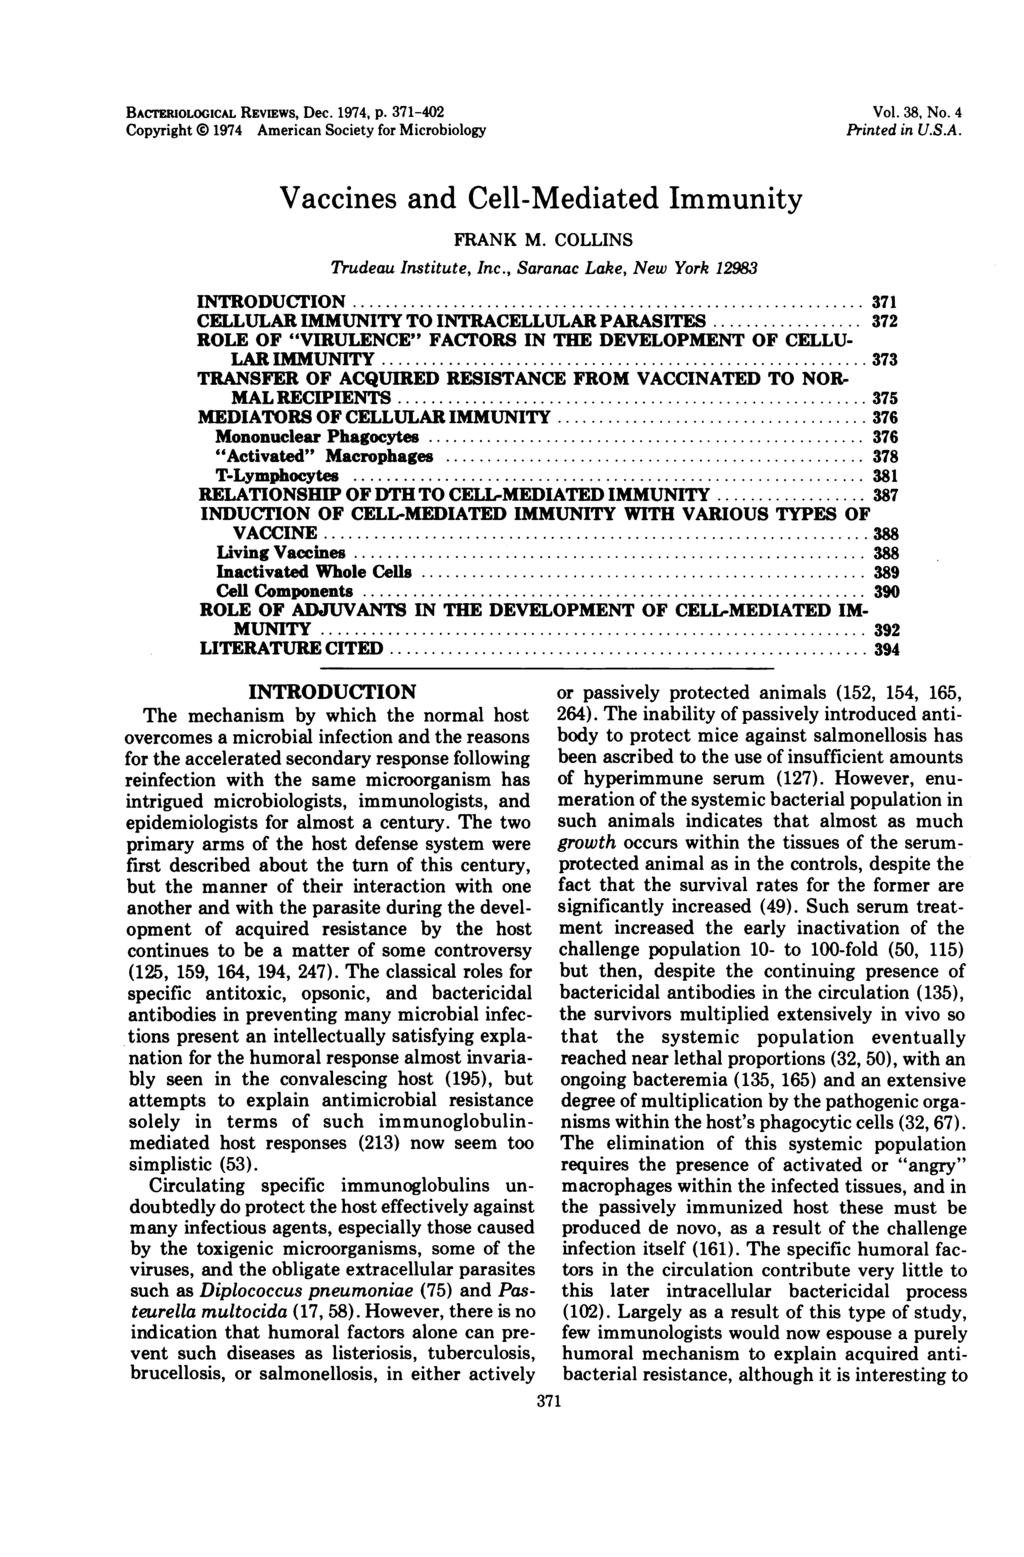 BACTrIOLOGICAL REVIEWS, Dec. 1974, p. 371-42 Copyright 1974 American Society for Microbiology Vol. 38, No. 4 Printed in U.S.A. Vaccines and Cell-Mediated Immunity FRANK M.